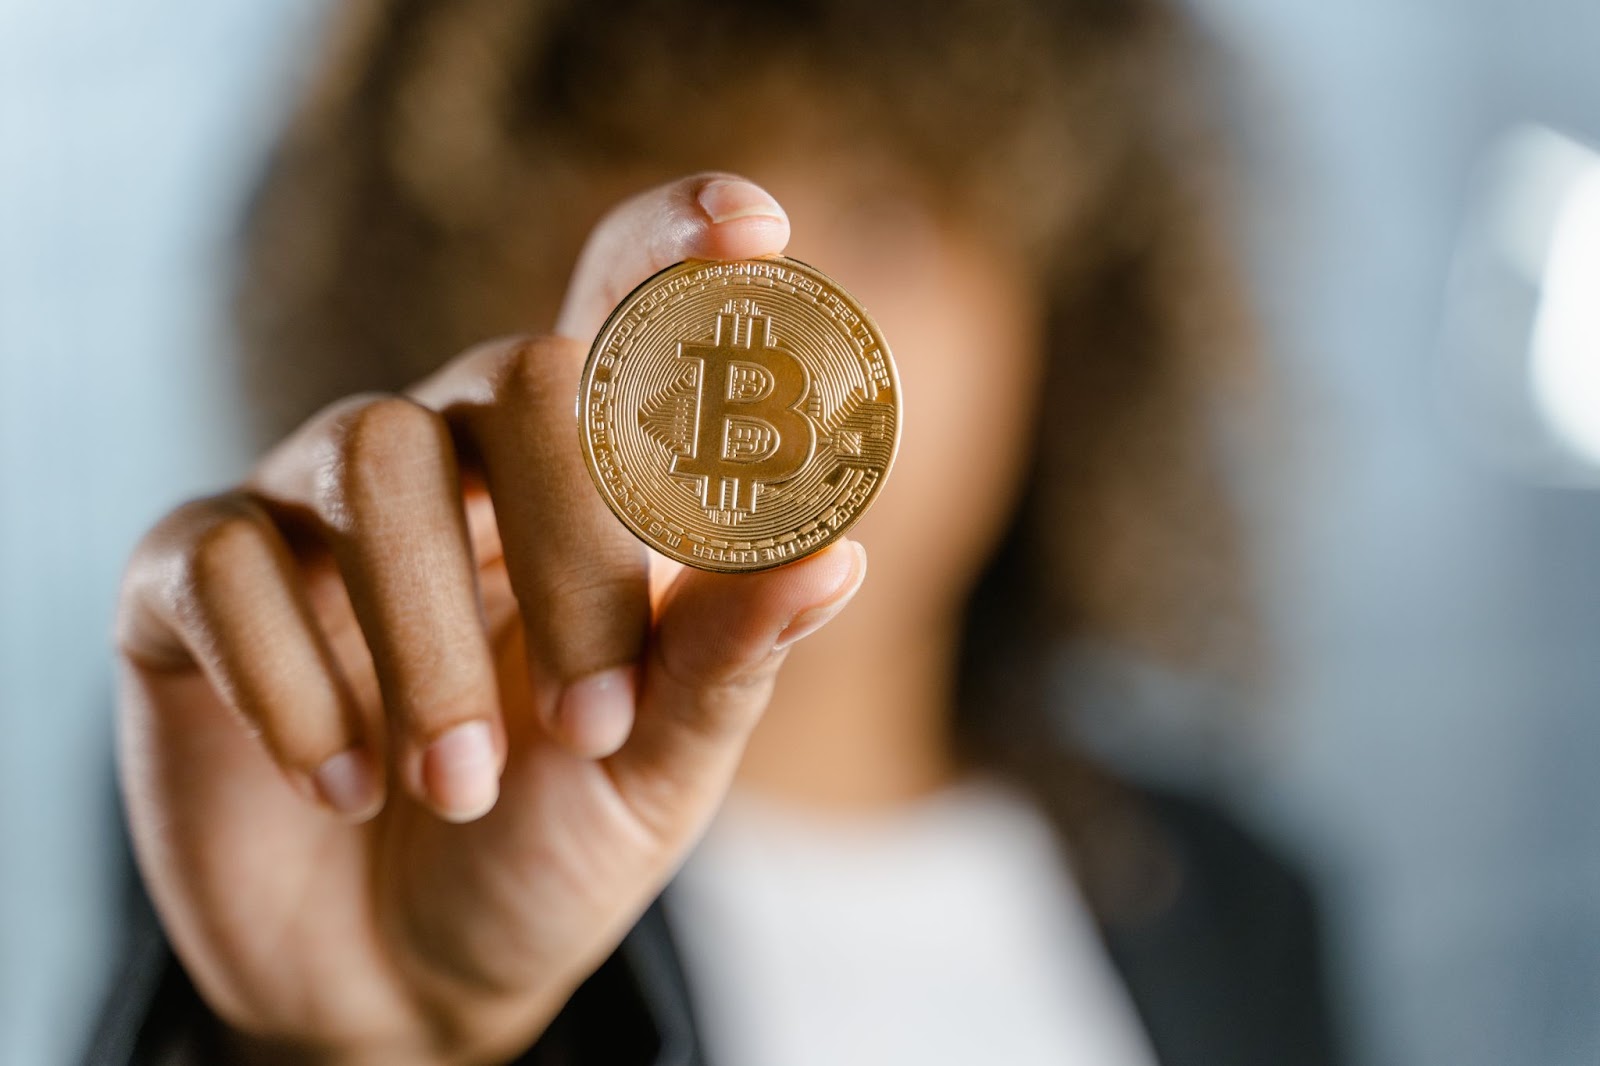 Bitcoin in the hand of a women showing it to the camera